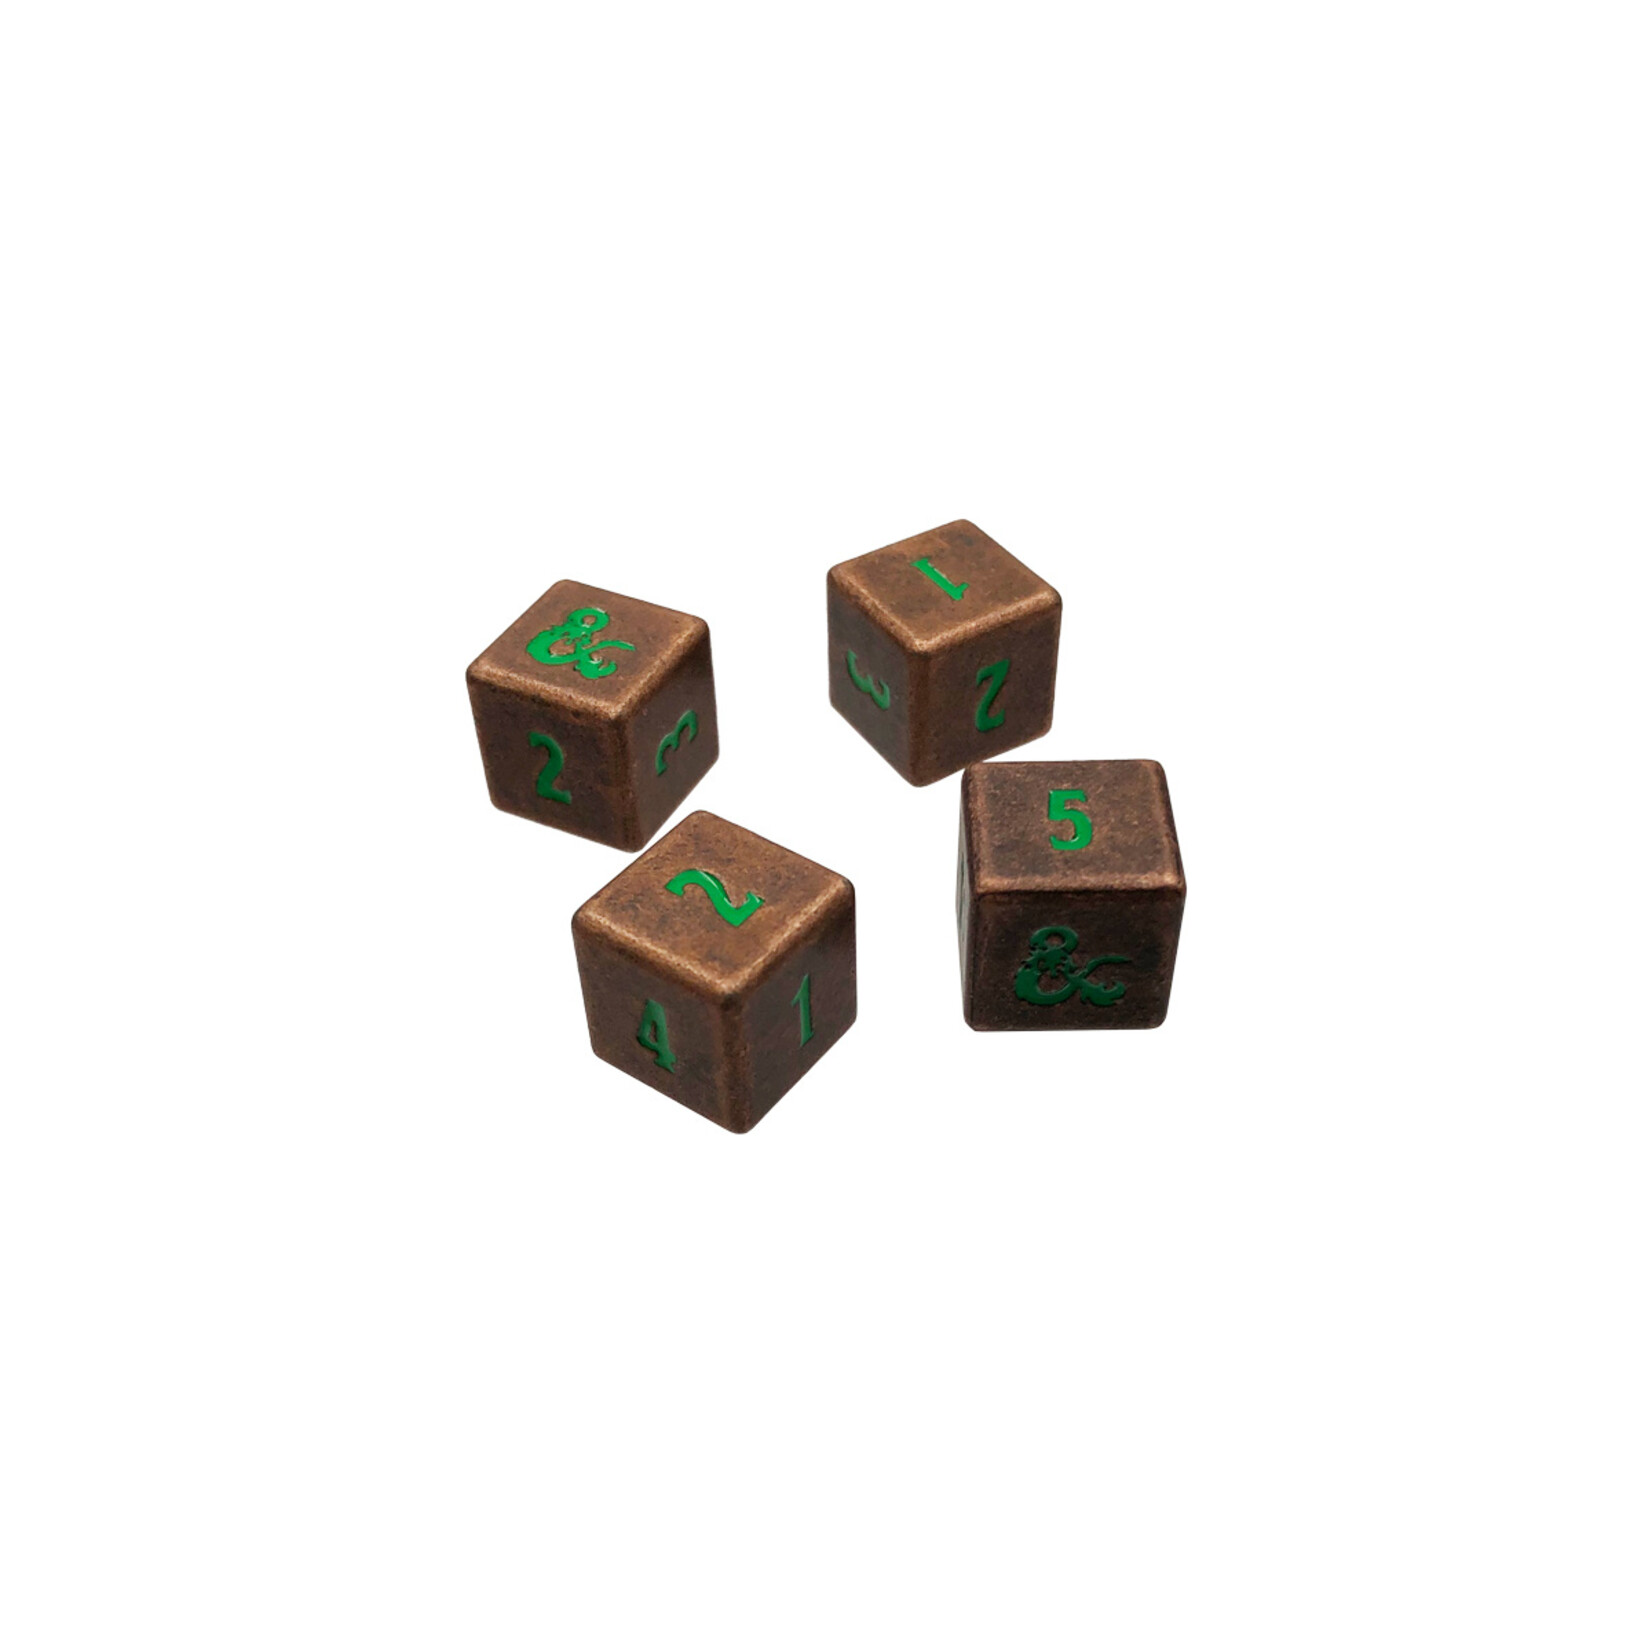 Ultra Pro Heavy Metal Fall 21 Copper and Green D6 Dice Set for Dungeons & Dragons